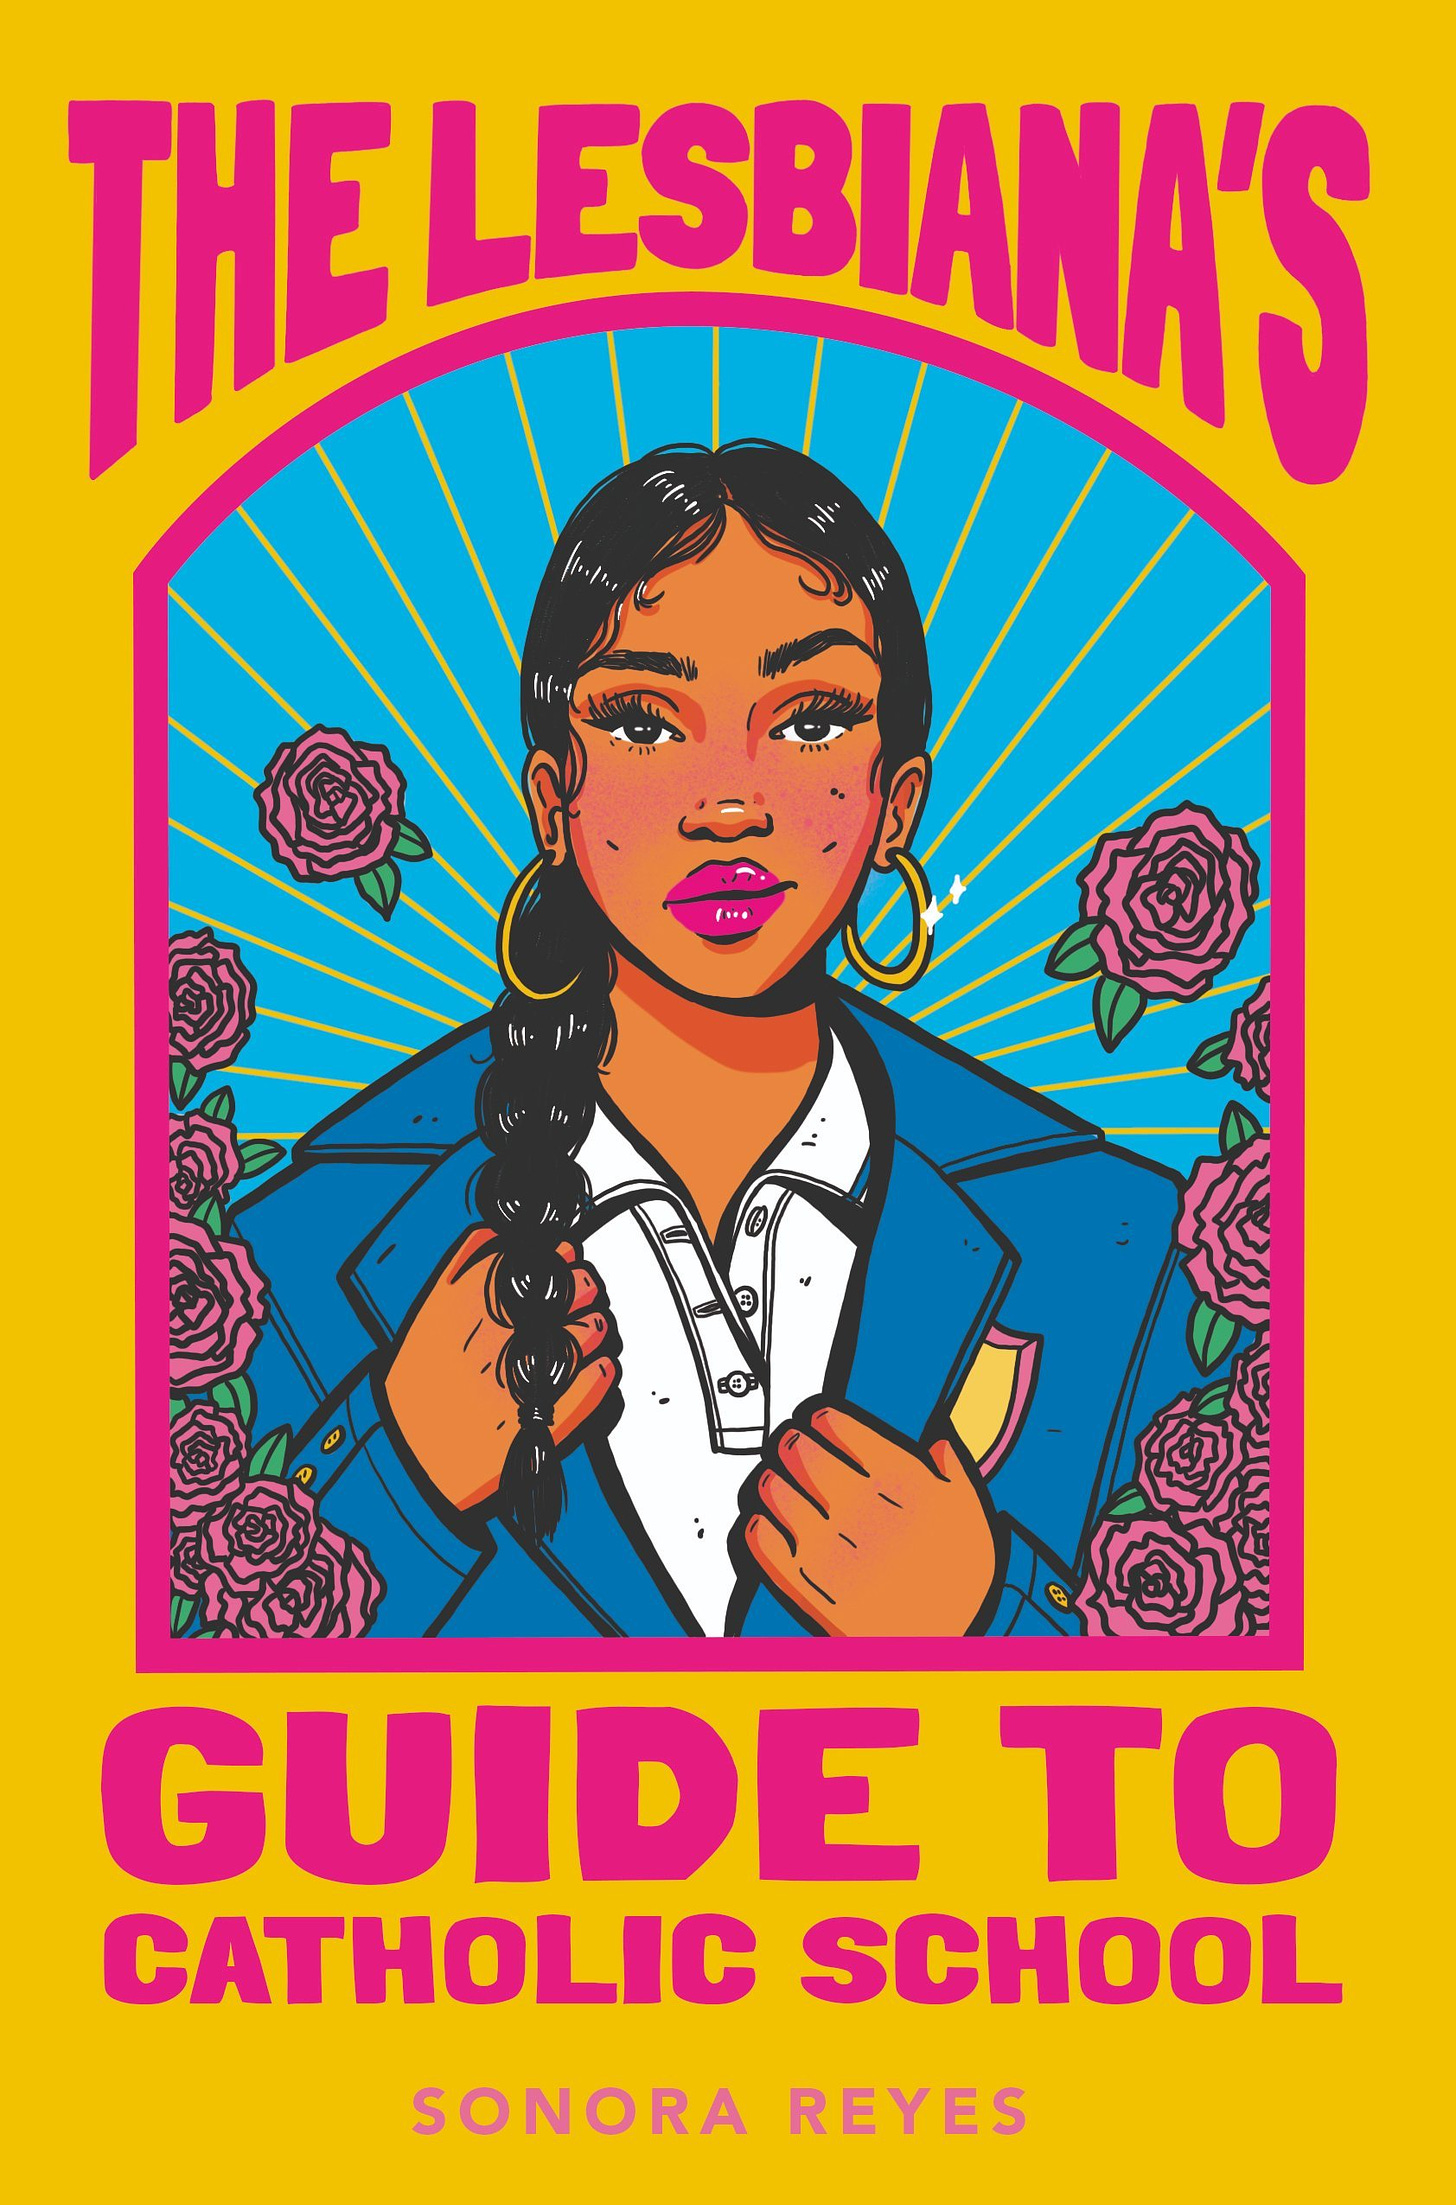 Cover of The Lesbiana's Guide to Catholic School by Sonora Reyes